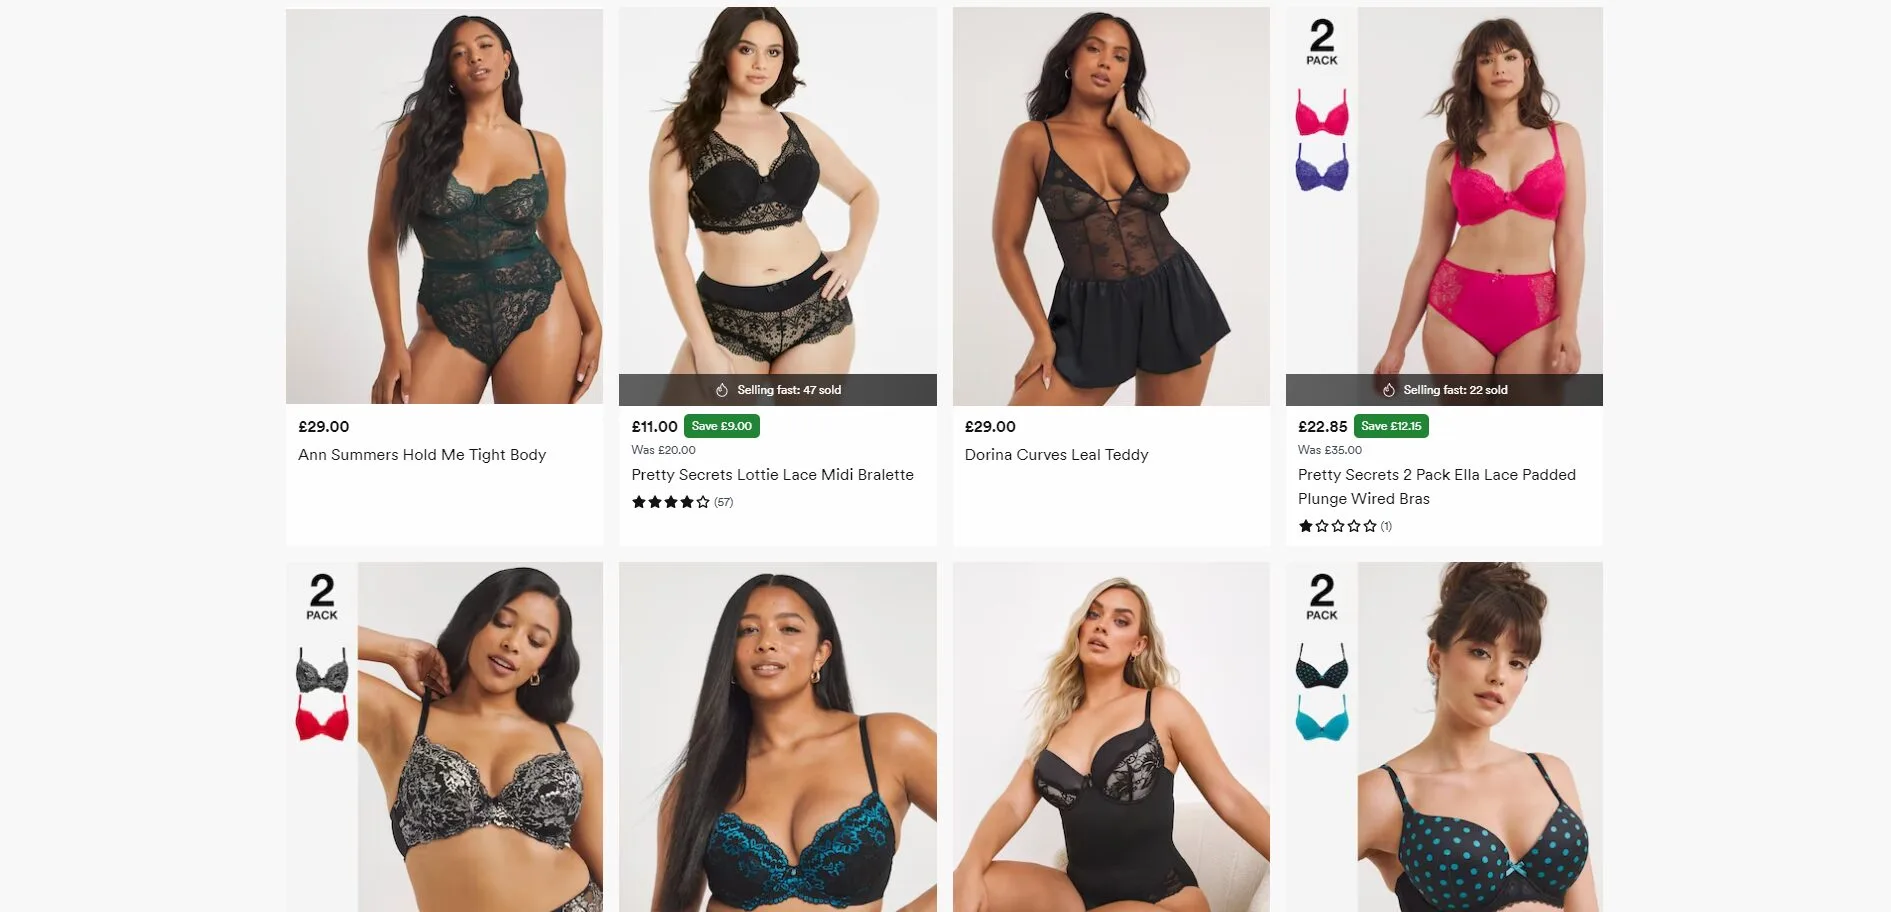 plus-size lingerie sets for boudoir photoshoot on SimplyBe marketplace